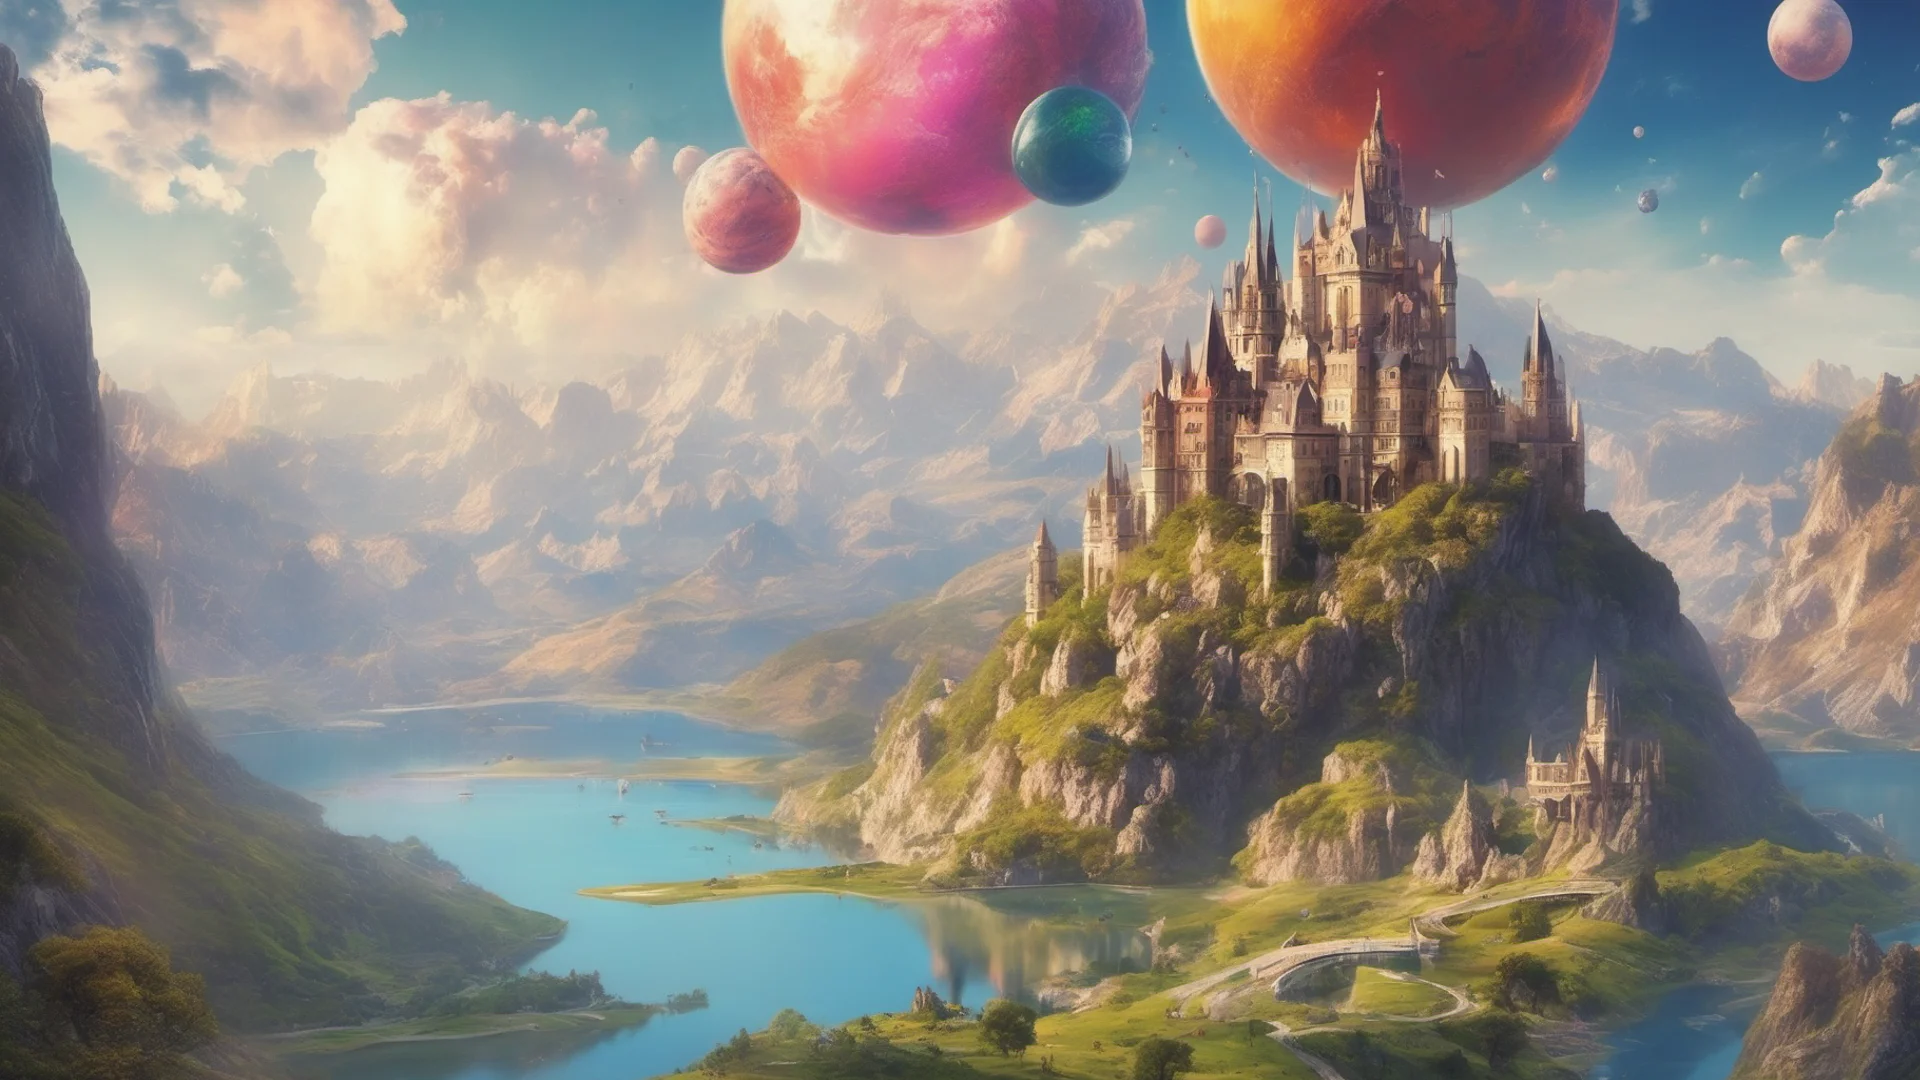 beautiful environment castle on mountains with lakes colorful planets above small flying airships confident engaging wow artstation art 3 wide